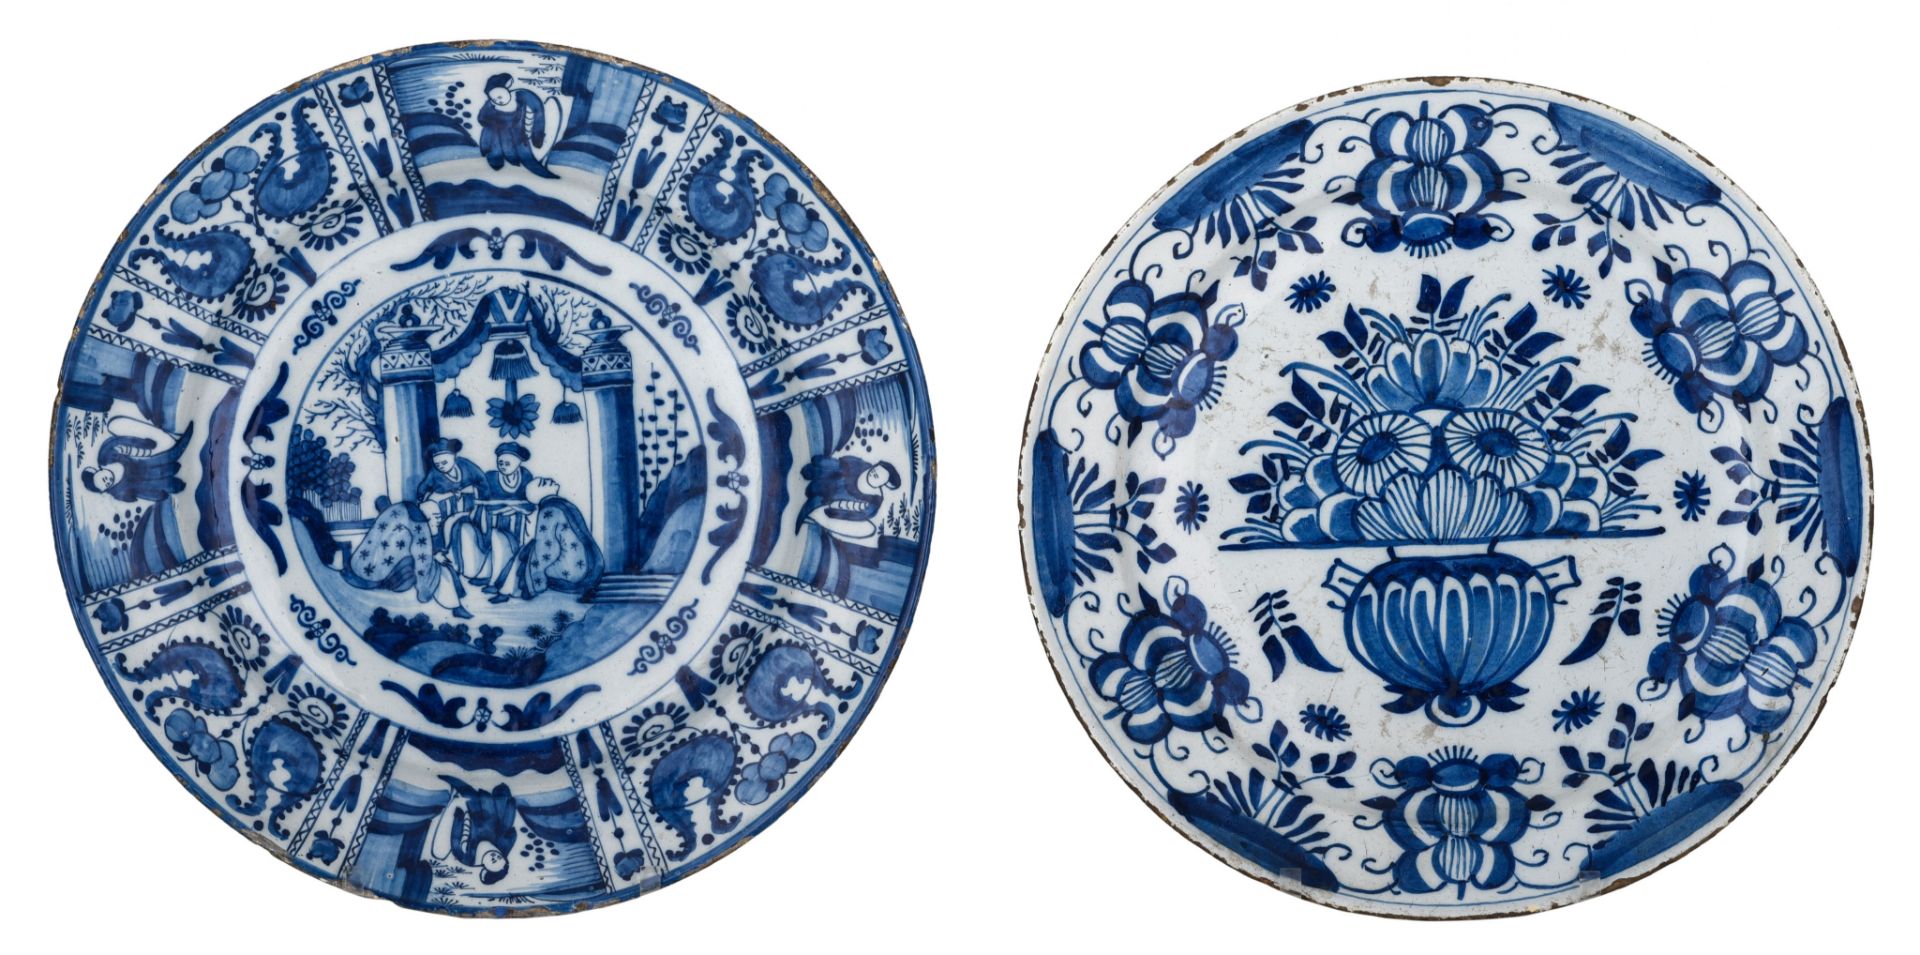 (BIDDING ONLY ON CARLOBONTE.BE) Two blue and white Delft chargers, 18thC, ¯ 34 - 35,5 cm